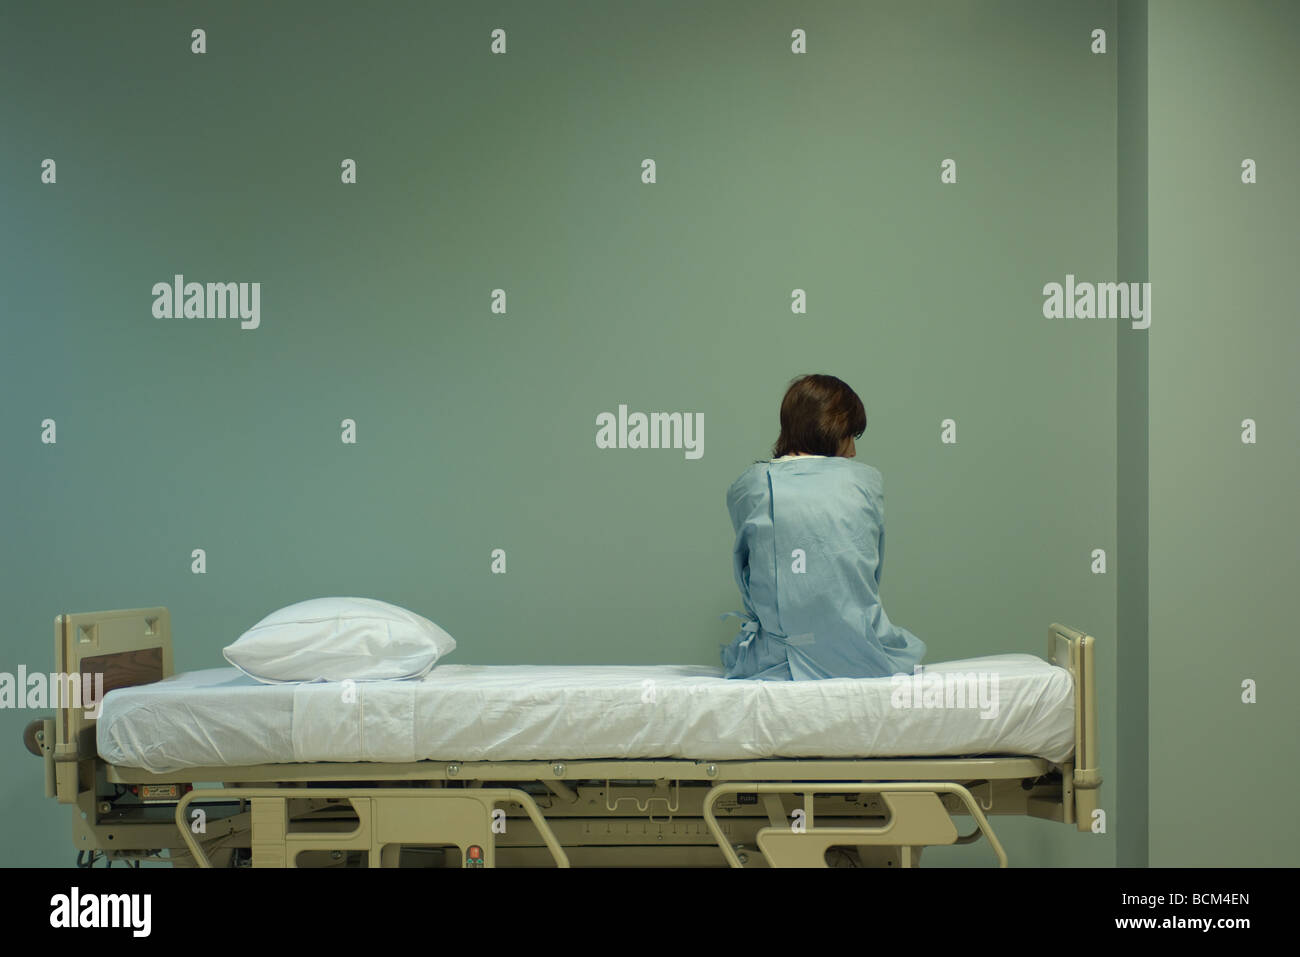 Female patient sitting on hospital bed, rear view Stock Photo